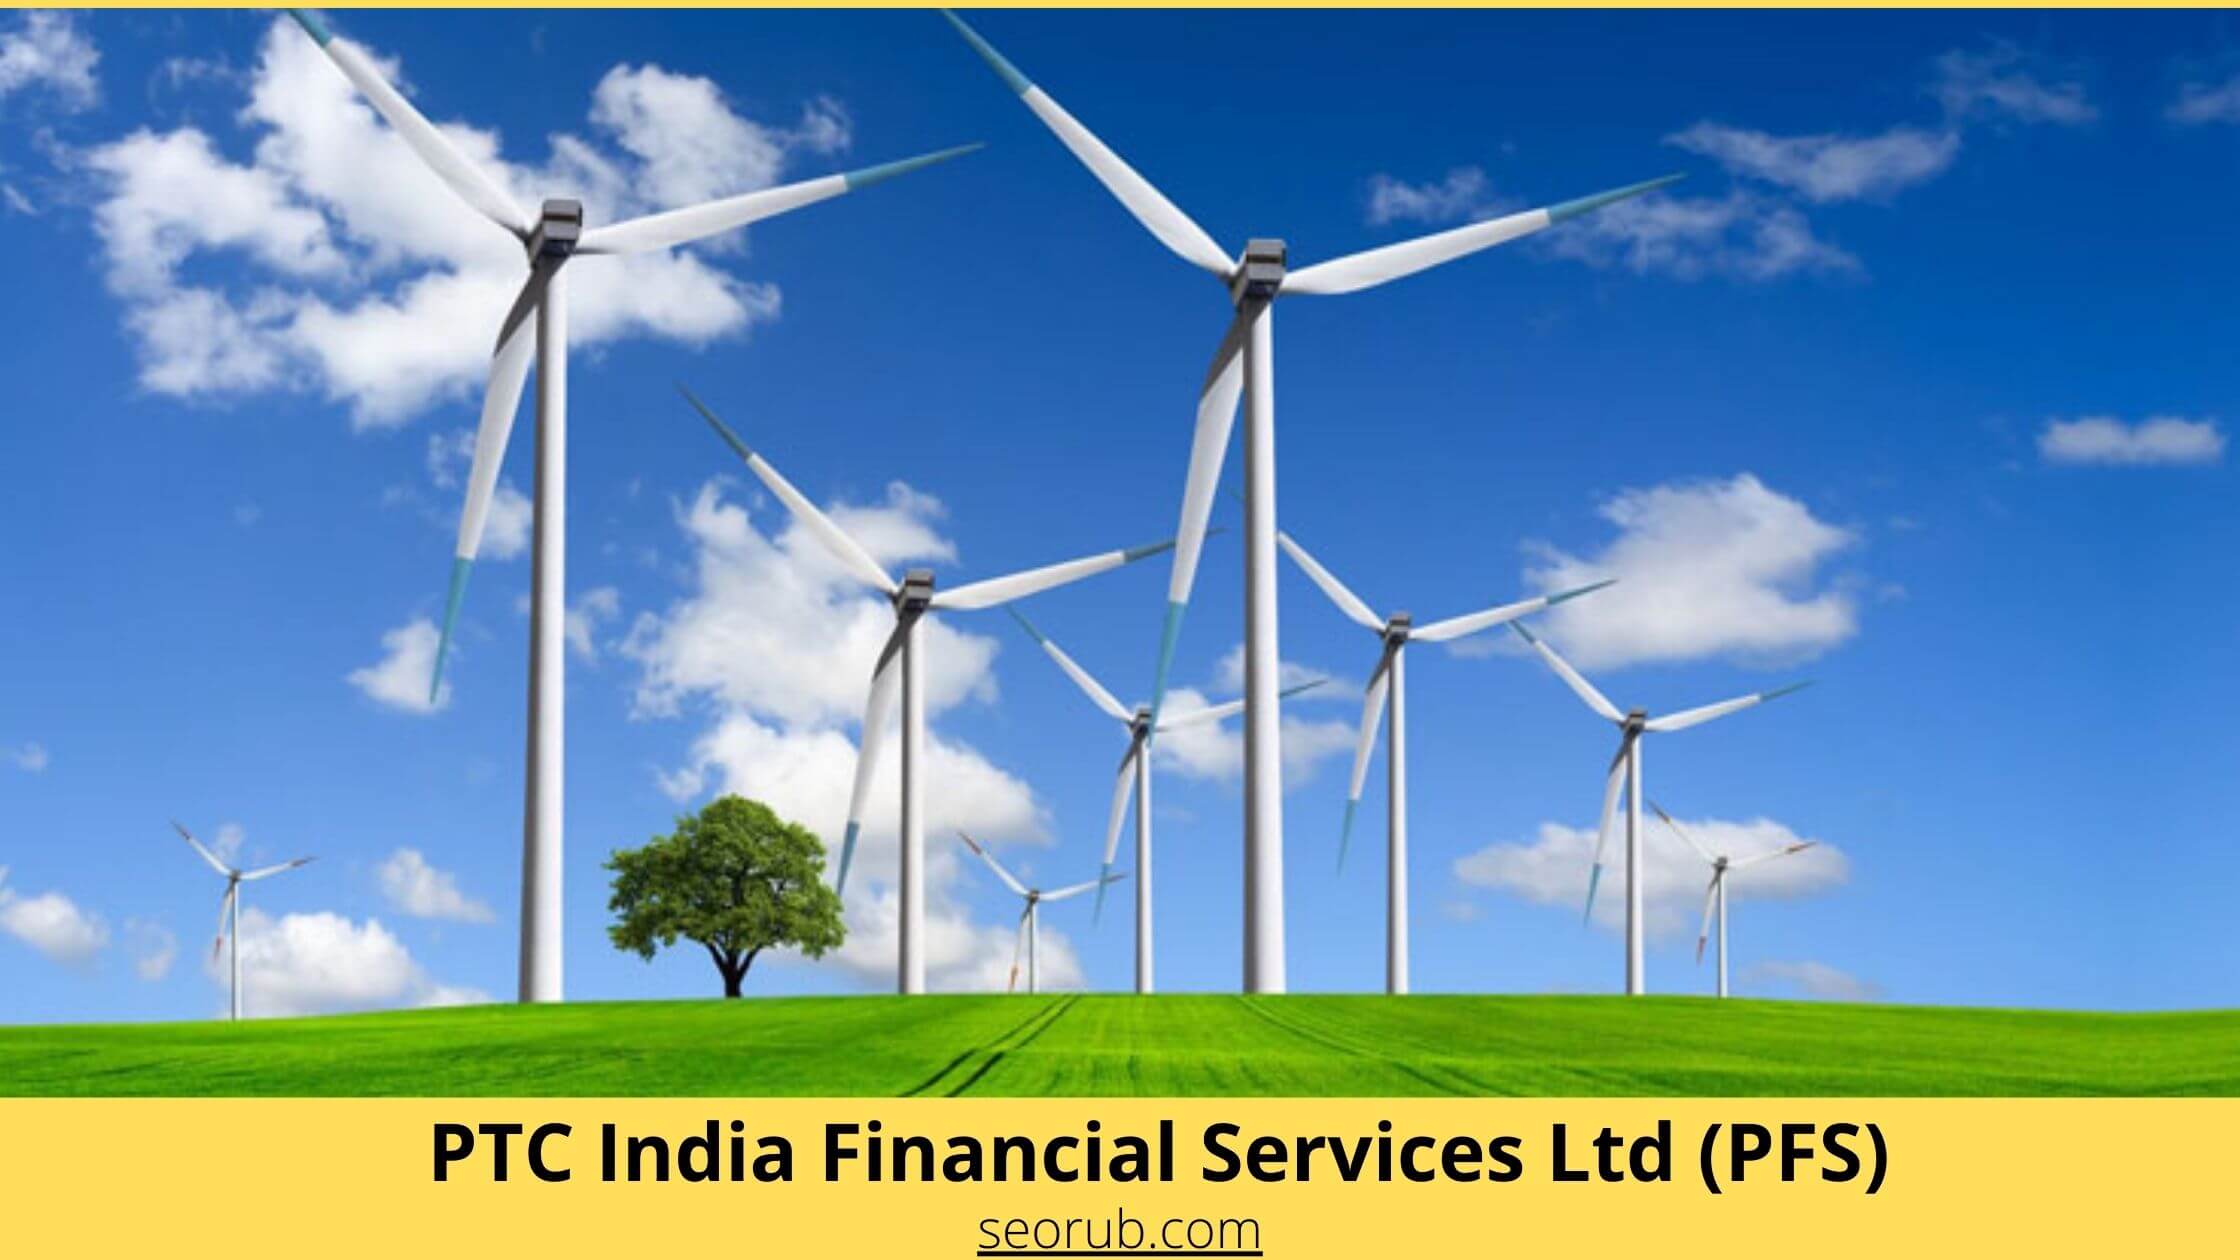 PTC India Financial Services Ltd (PFS) Share price target in 2022 pic